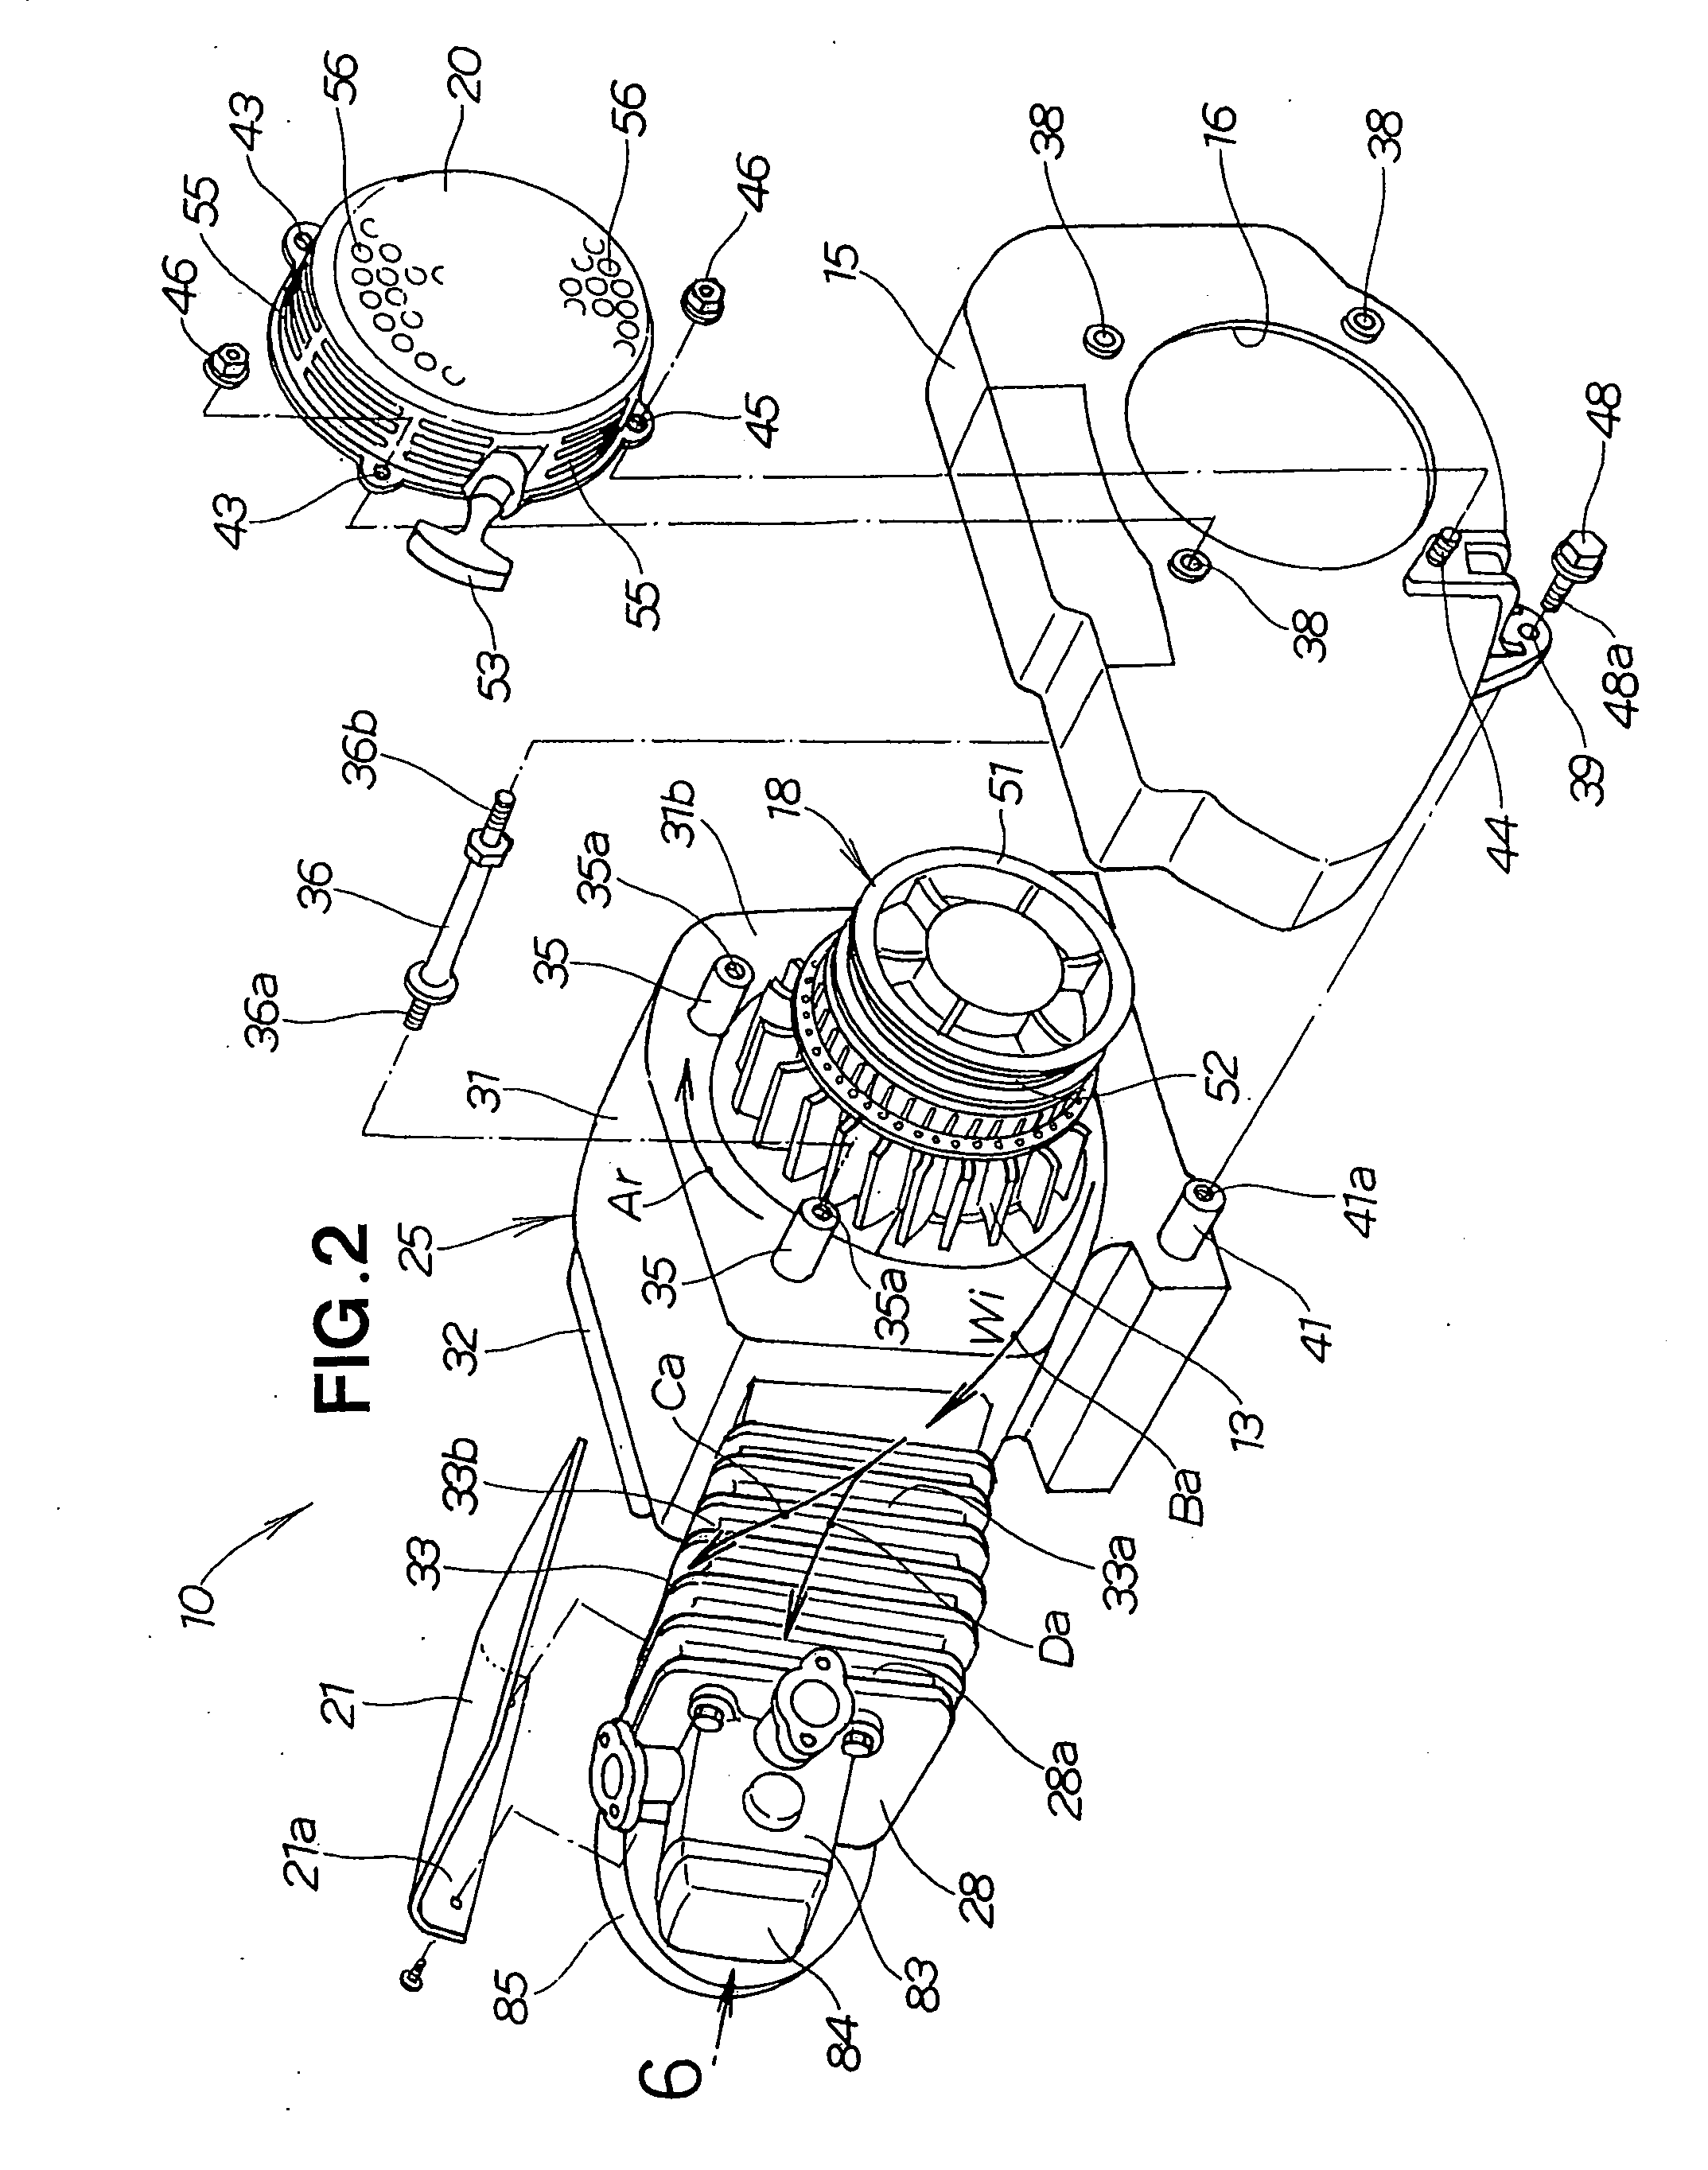 Air-cooled engine